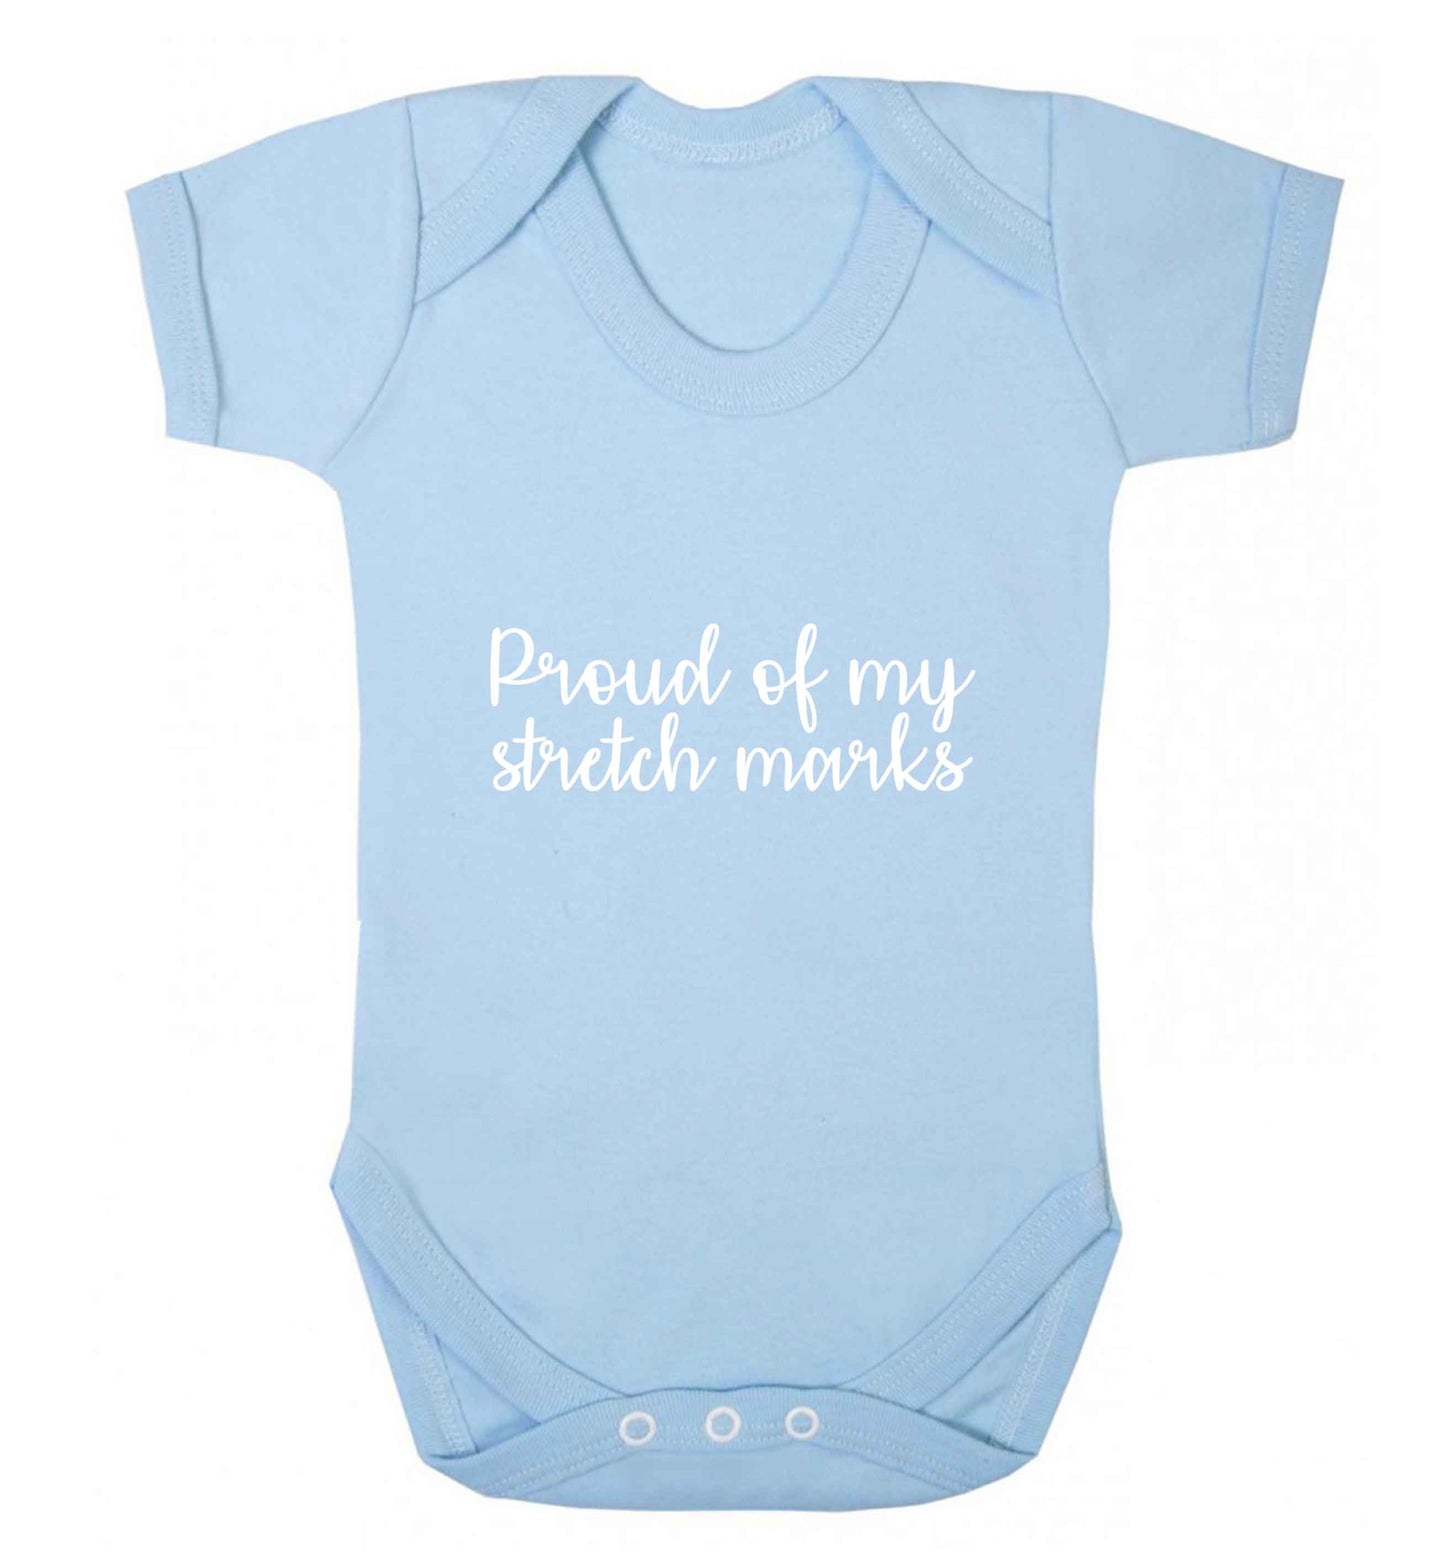 Proud of my stretch marks baby vest pale blue 18-24 months